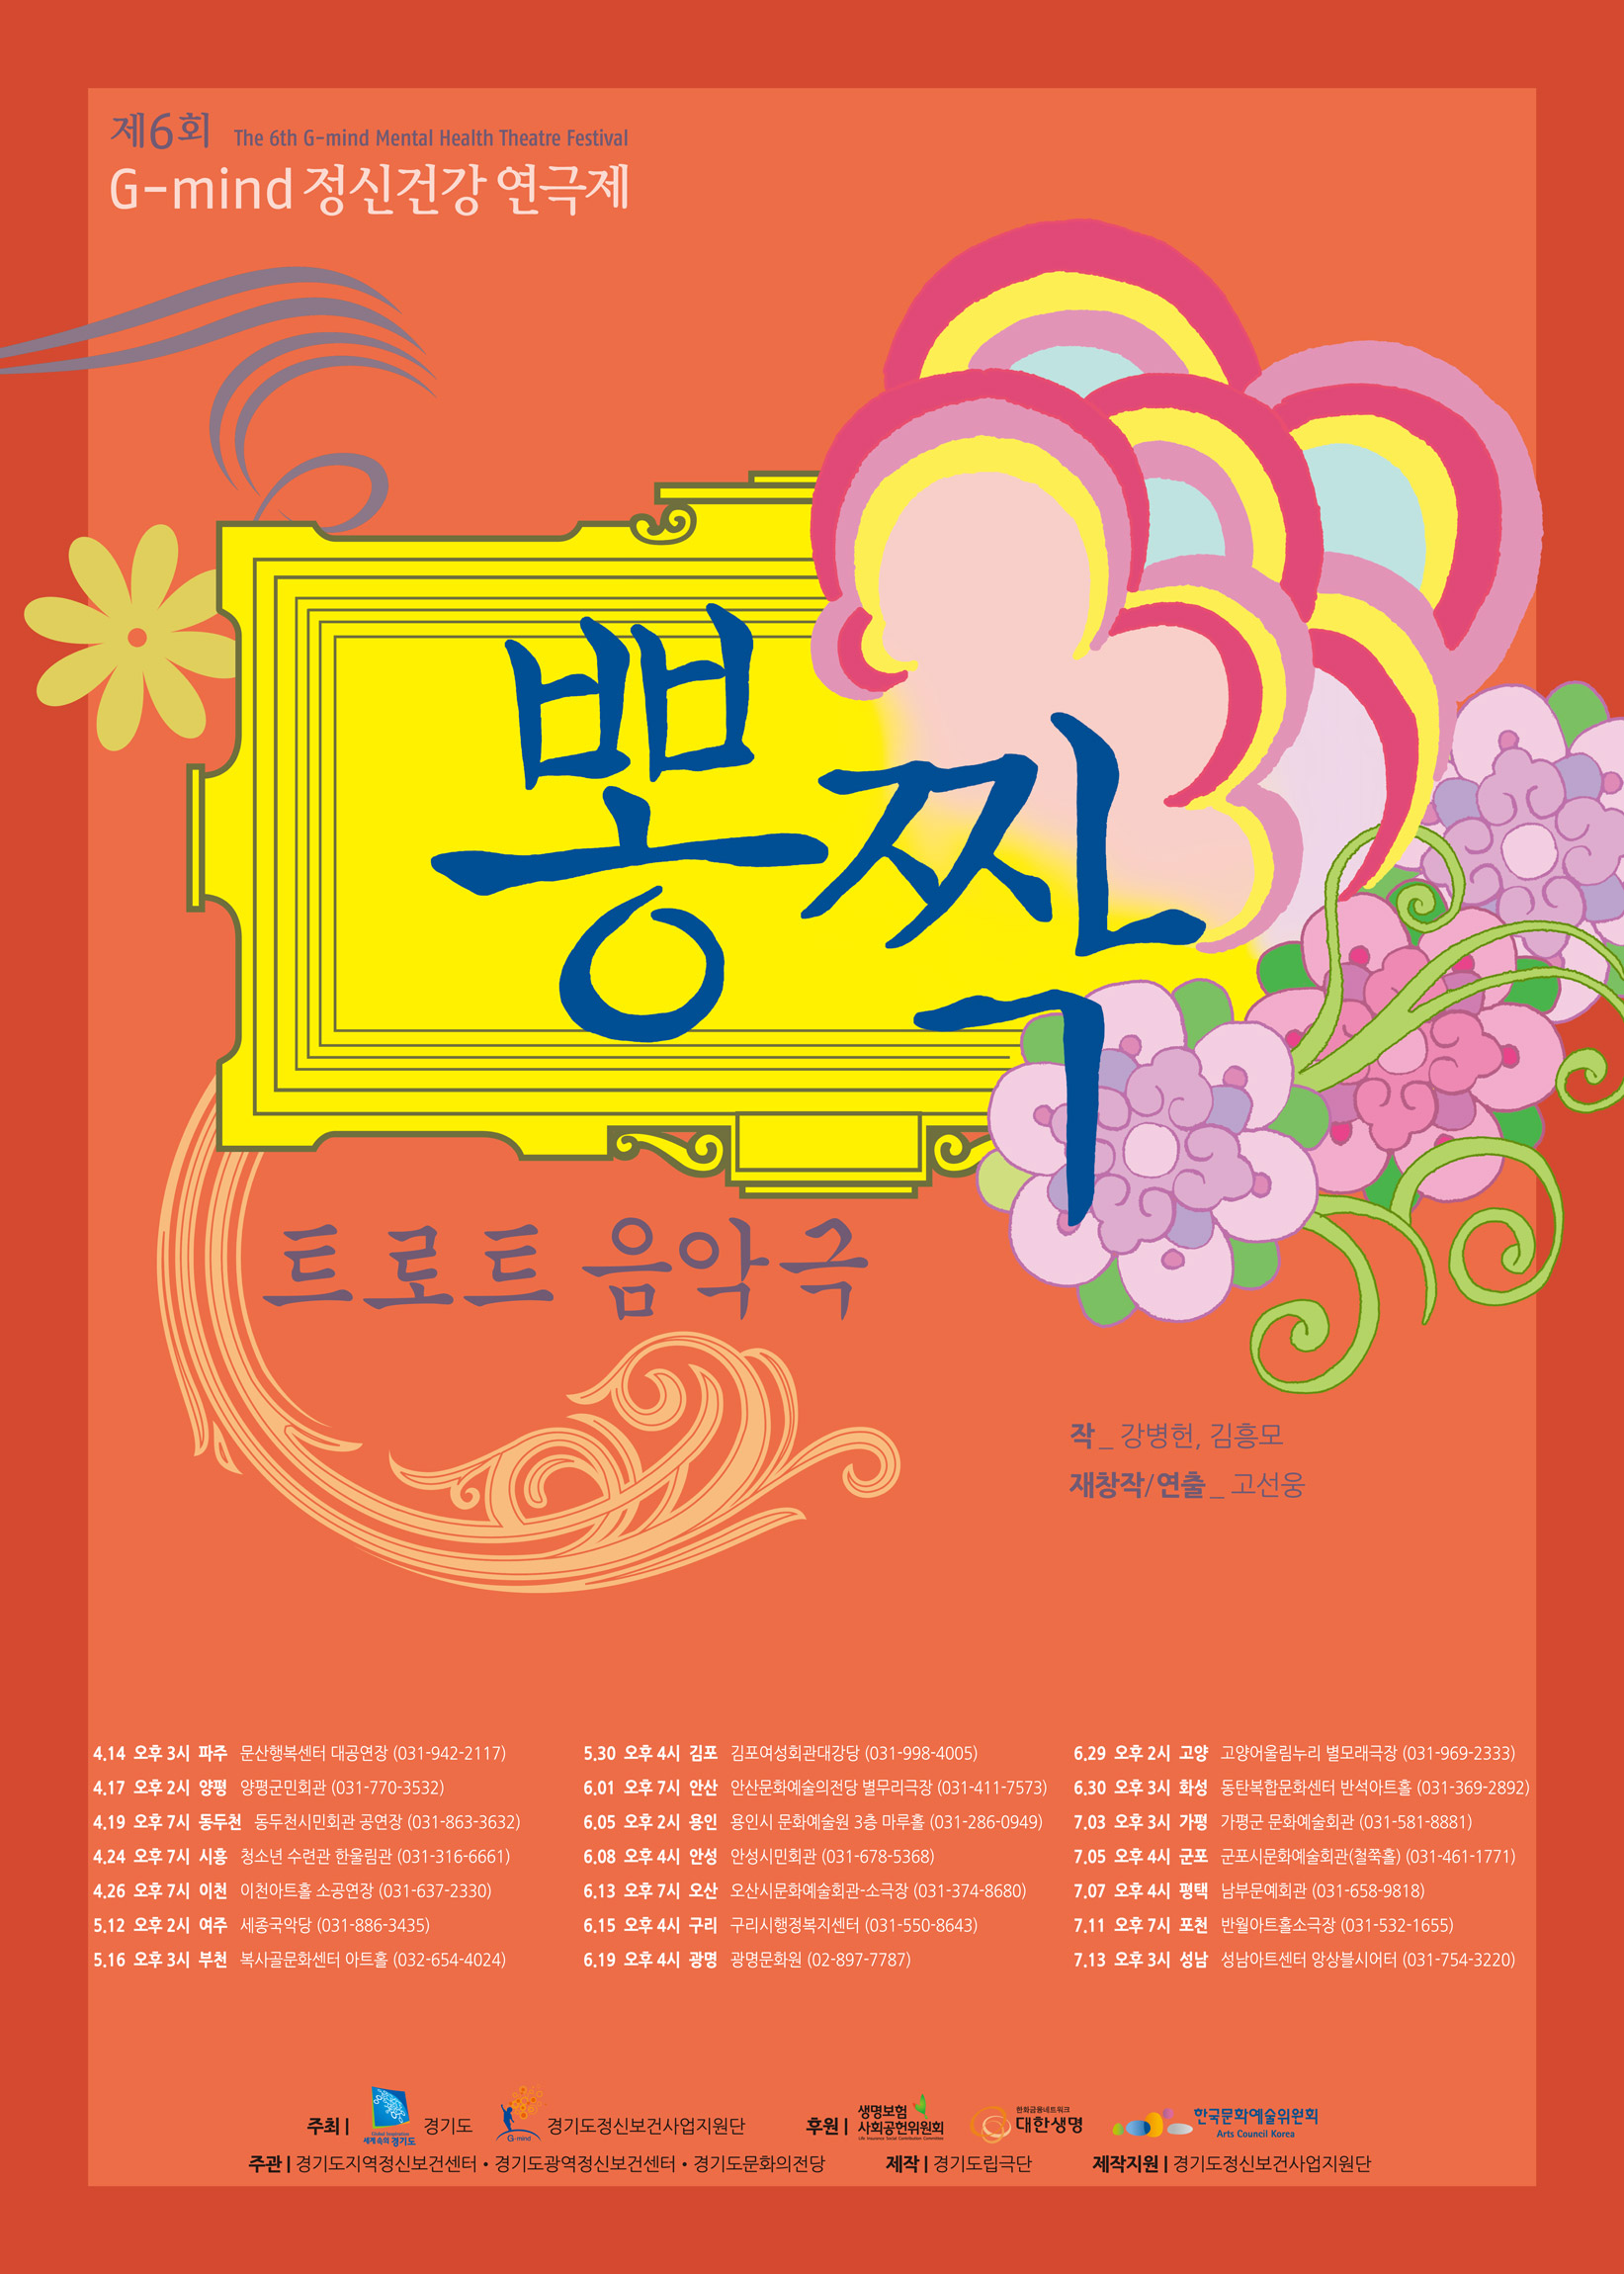 Gmind Theatre Festival Gyeonggi Province Center Posters & Banners gmind-theatre-poster.jpg